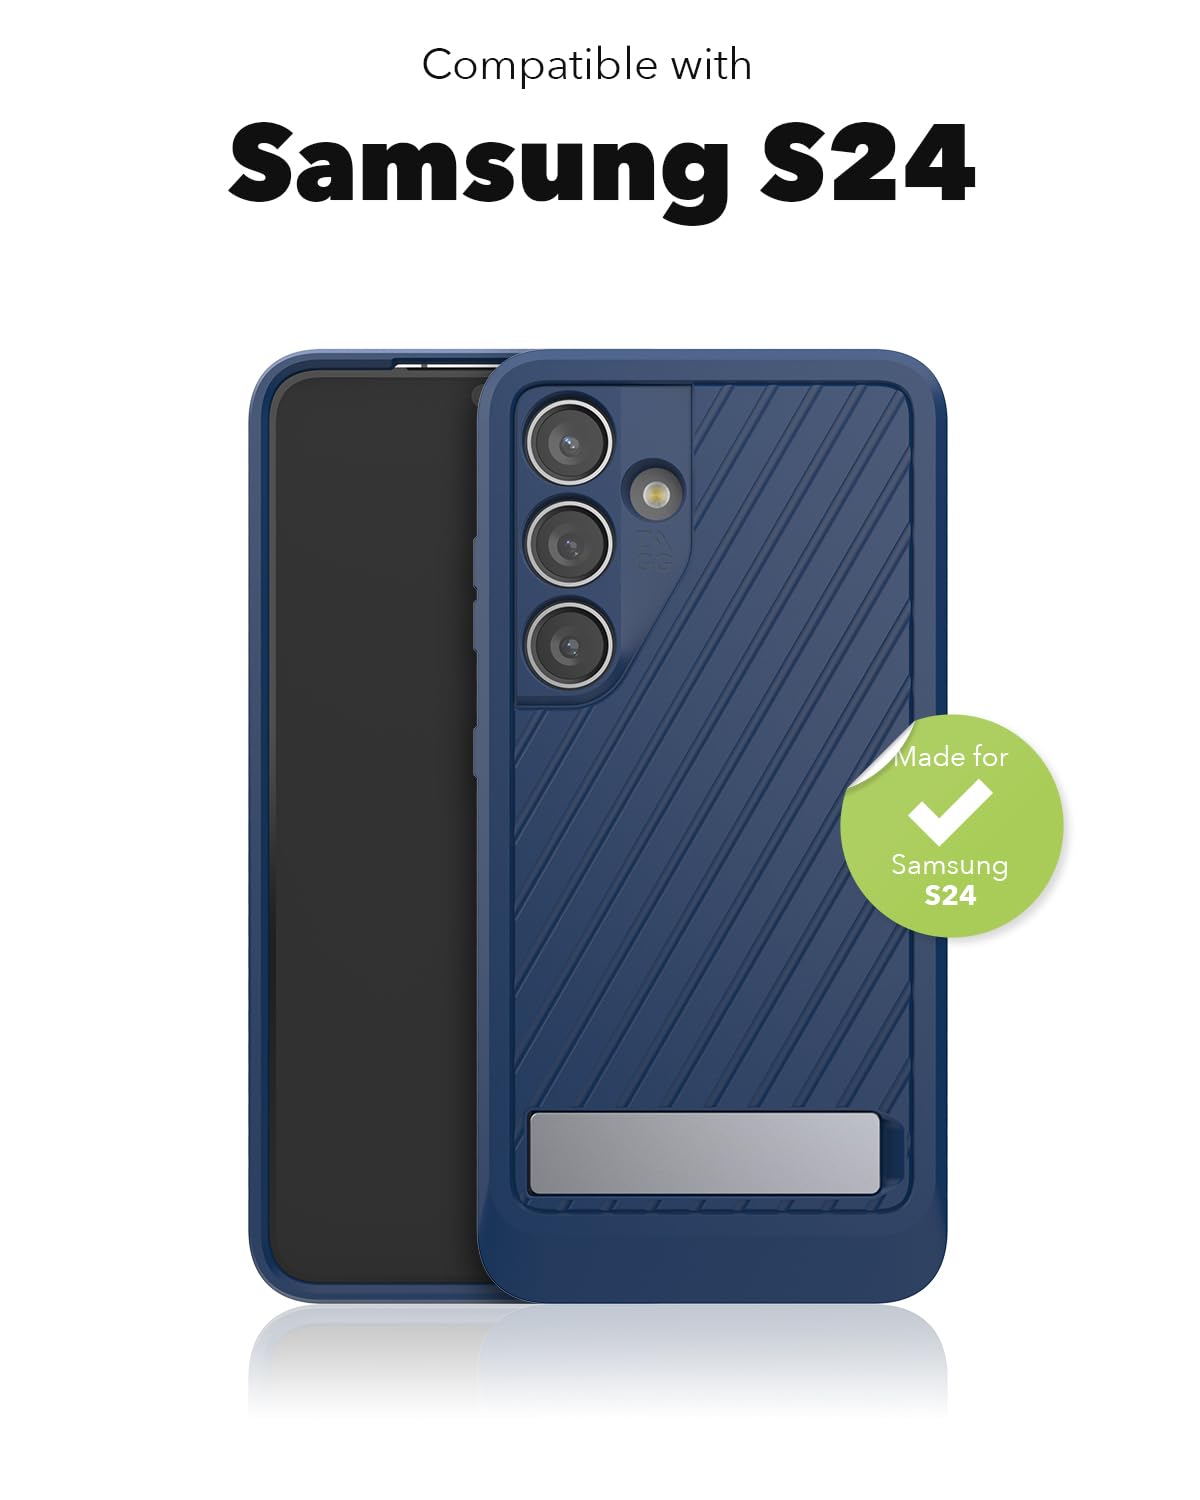 ZAGG Everest Samsung Galaxy S24 Case with Kickstand - Triple Layer Graphene-Infused Drop Protection up to 20ft, Eco-Friendly Design, Textured Grip, Navy